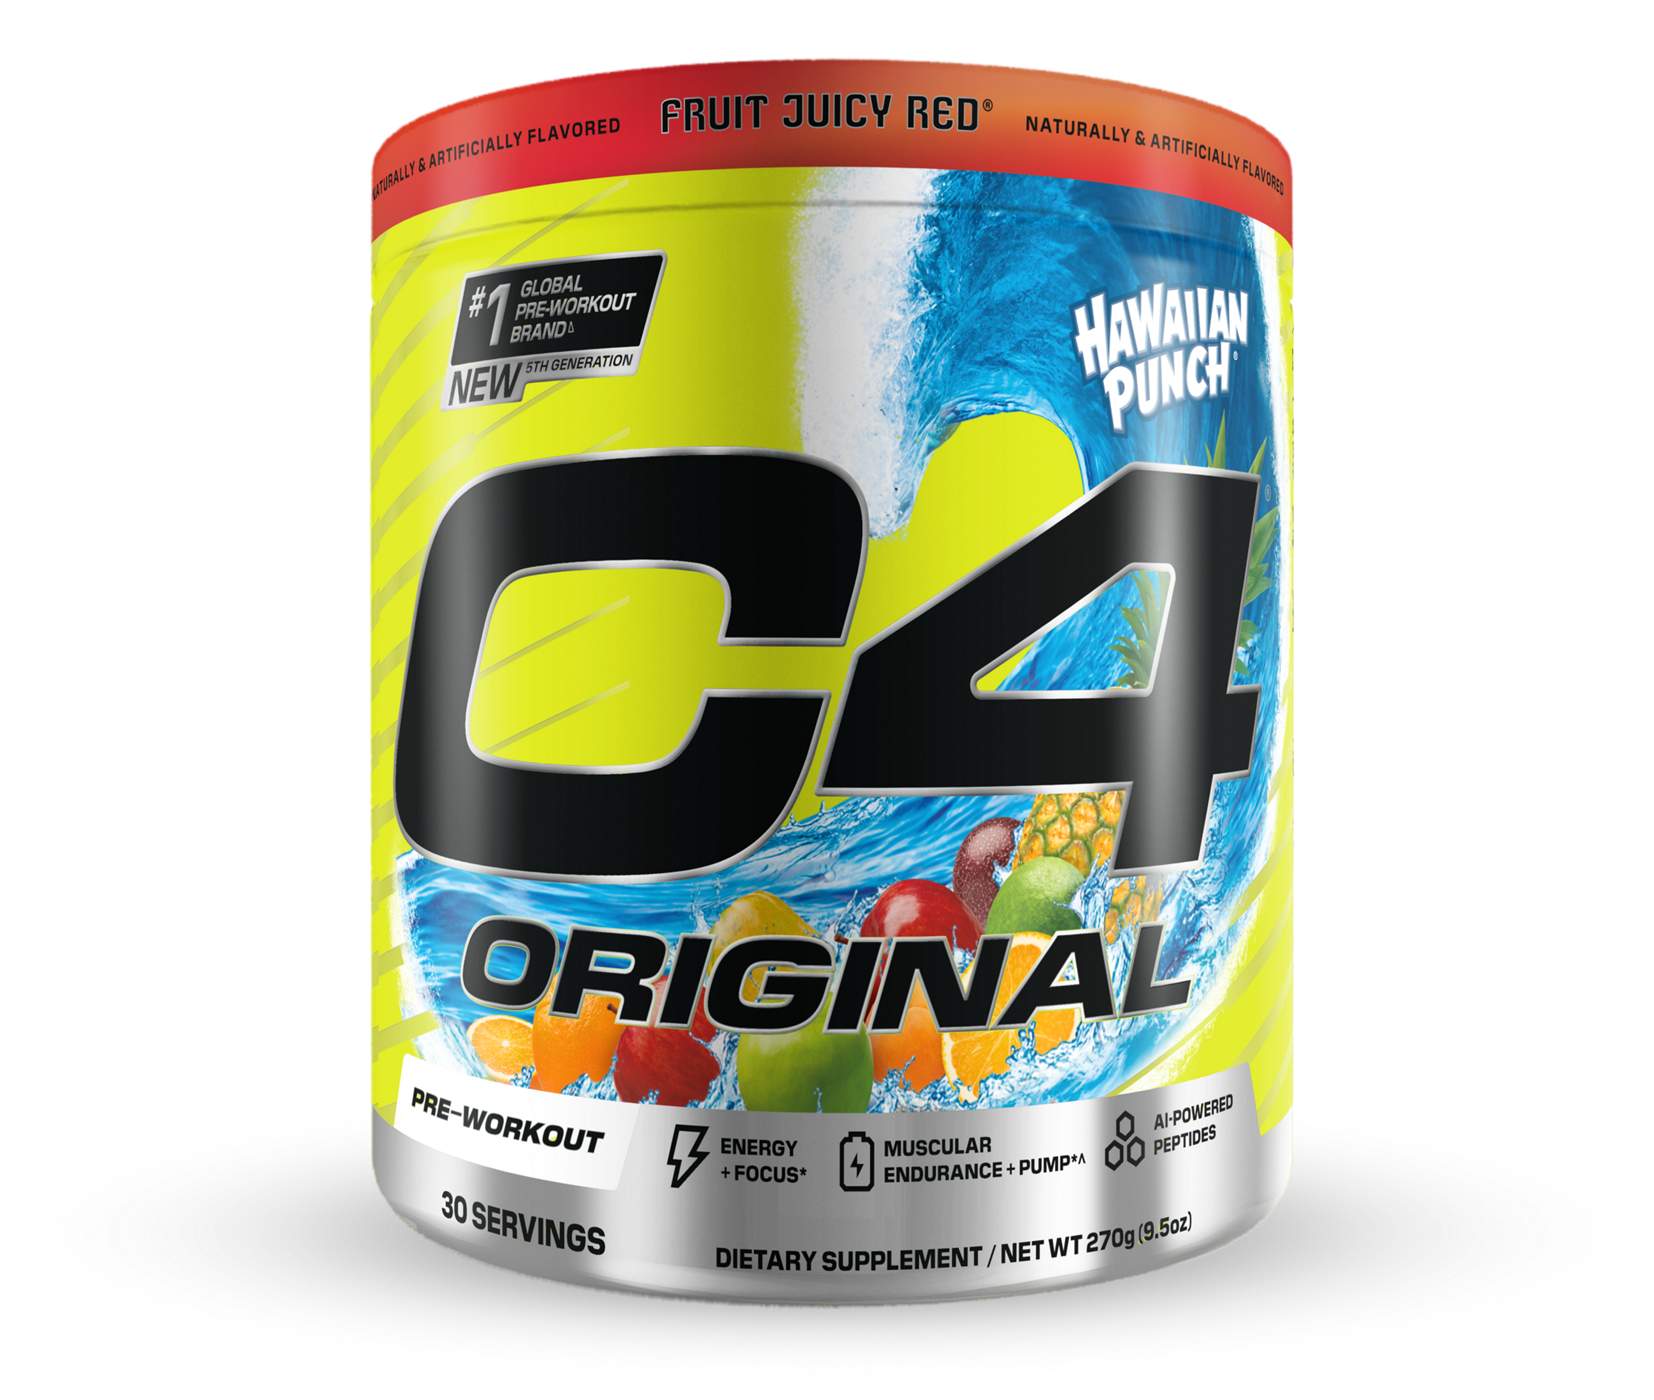 Cellucor C4 Original Pre-Workout - Hawaiian Punch Fruit Juicy Red; image 5 of 6